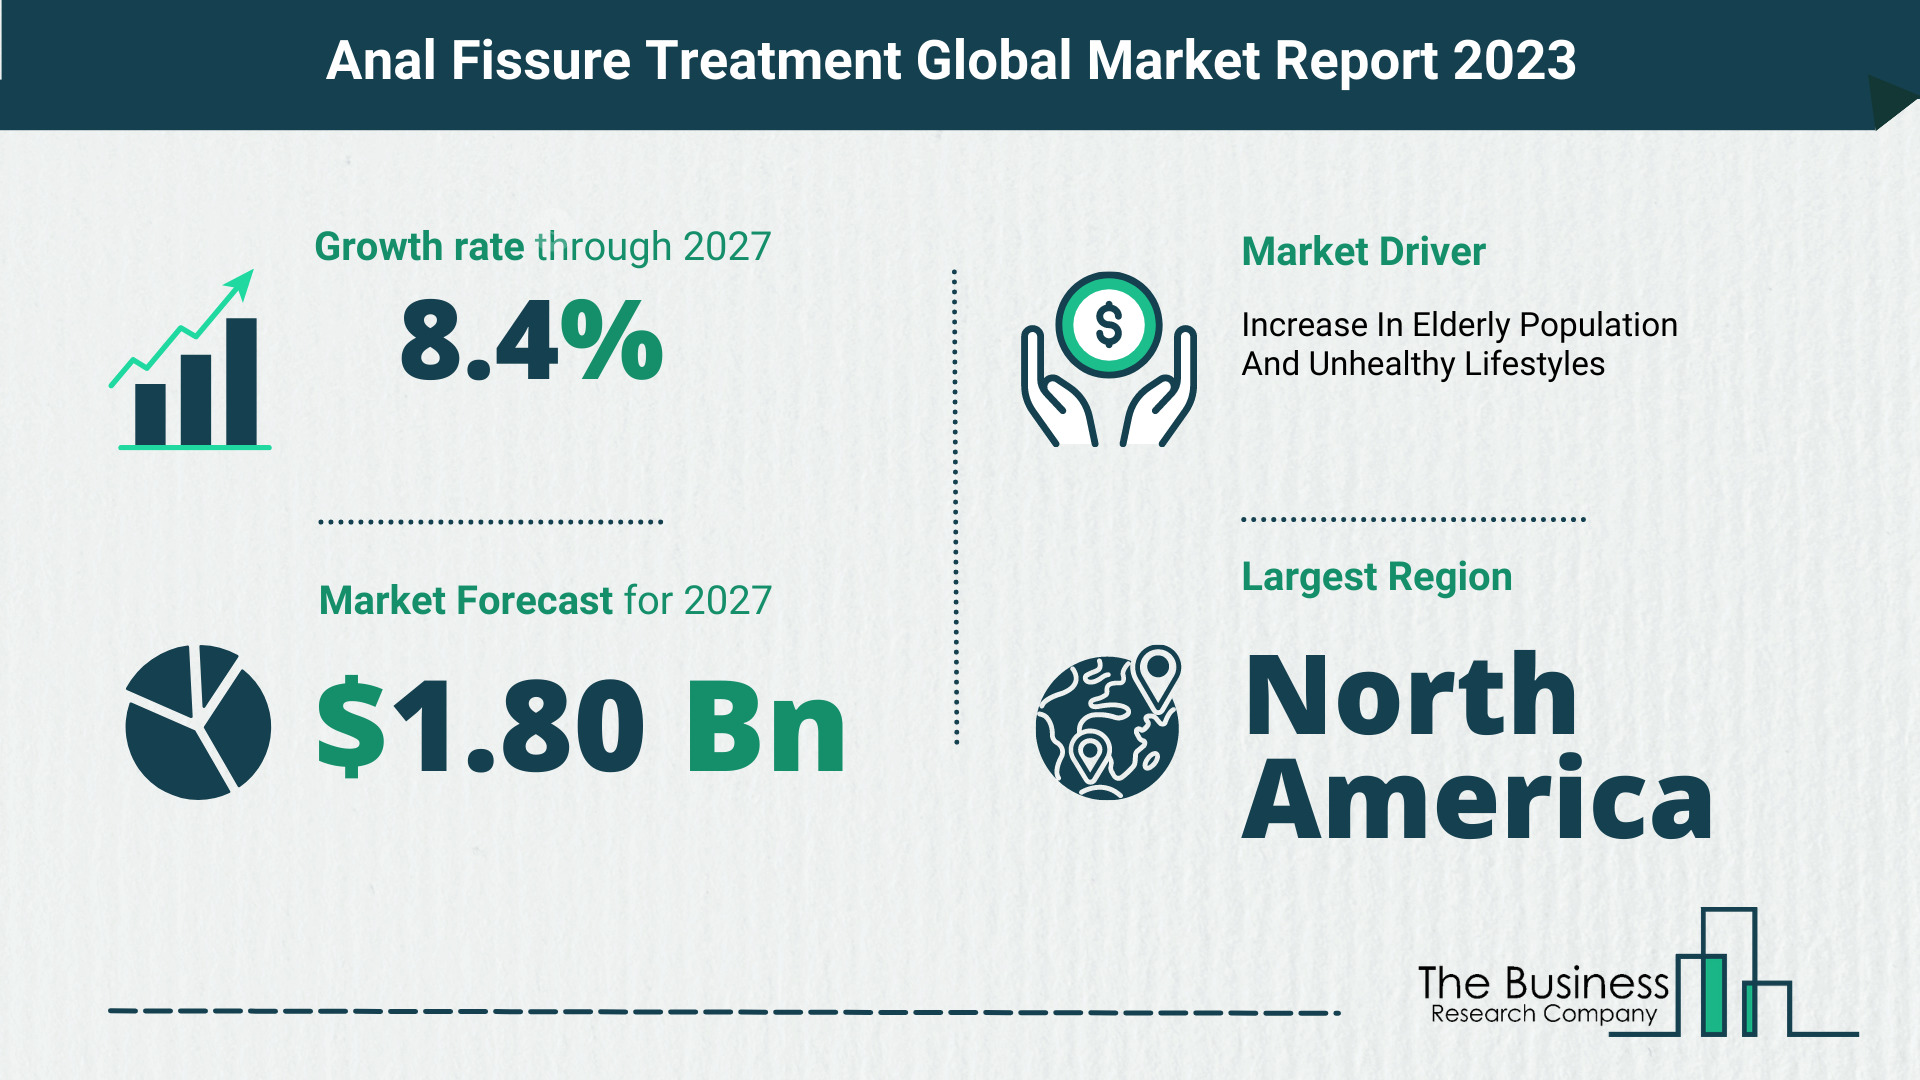 The Business Research Company offers the anal fissure treatment market research report 2023 with industry size, share, segments and market growth